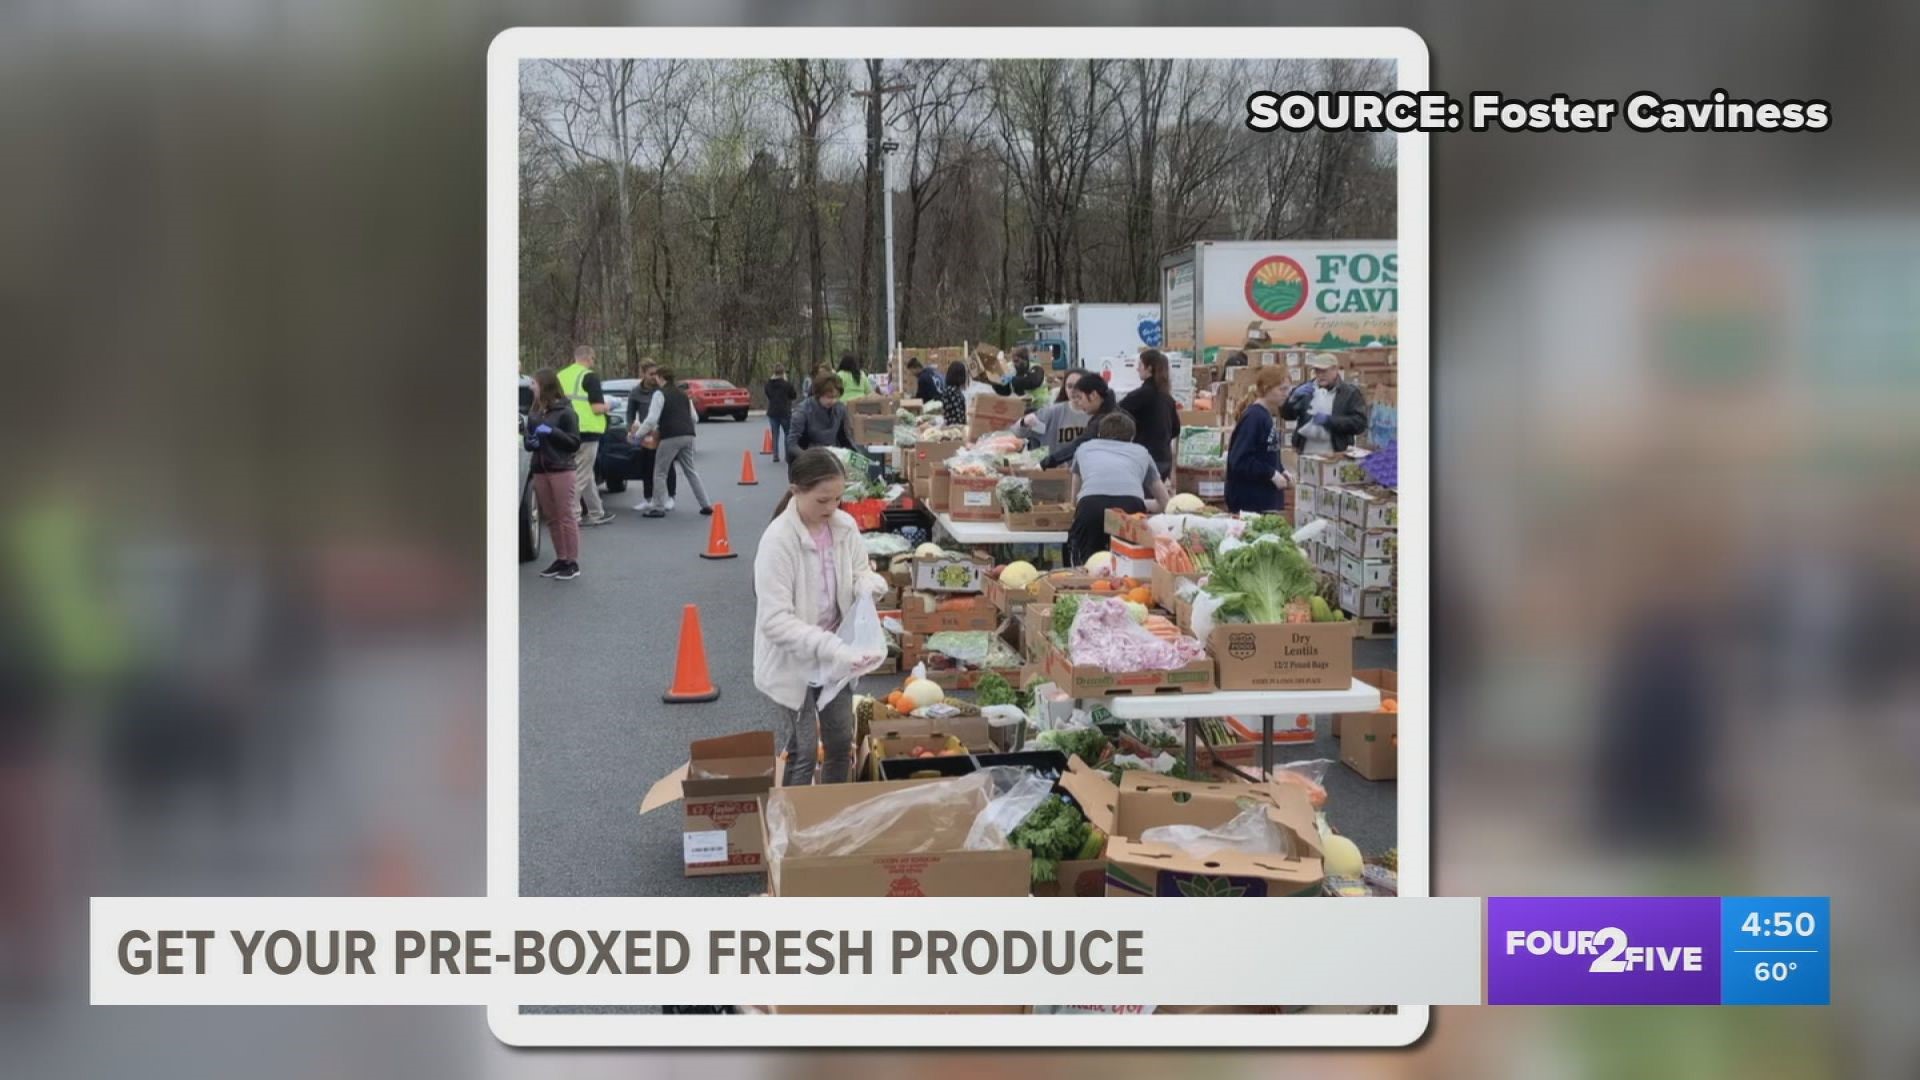 A program, created by Foster Caviness, delivers fresh produce to families and stores. The produce is home-grown by North Carolina farmers.